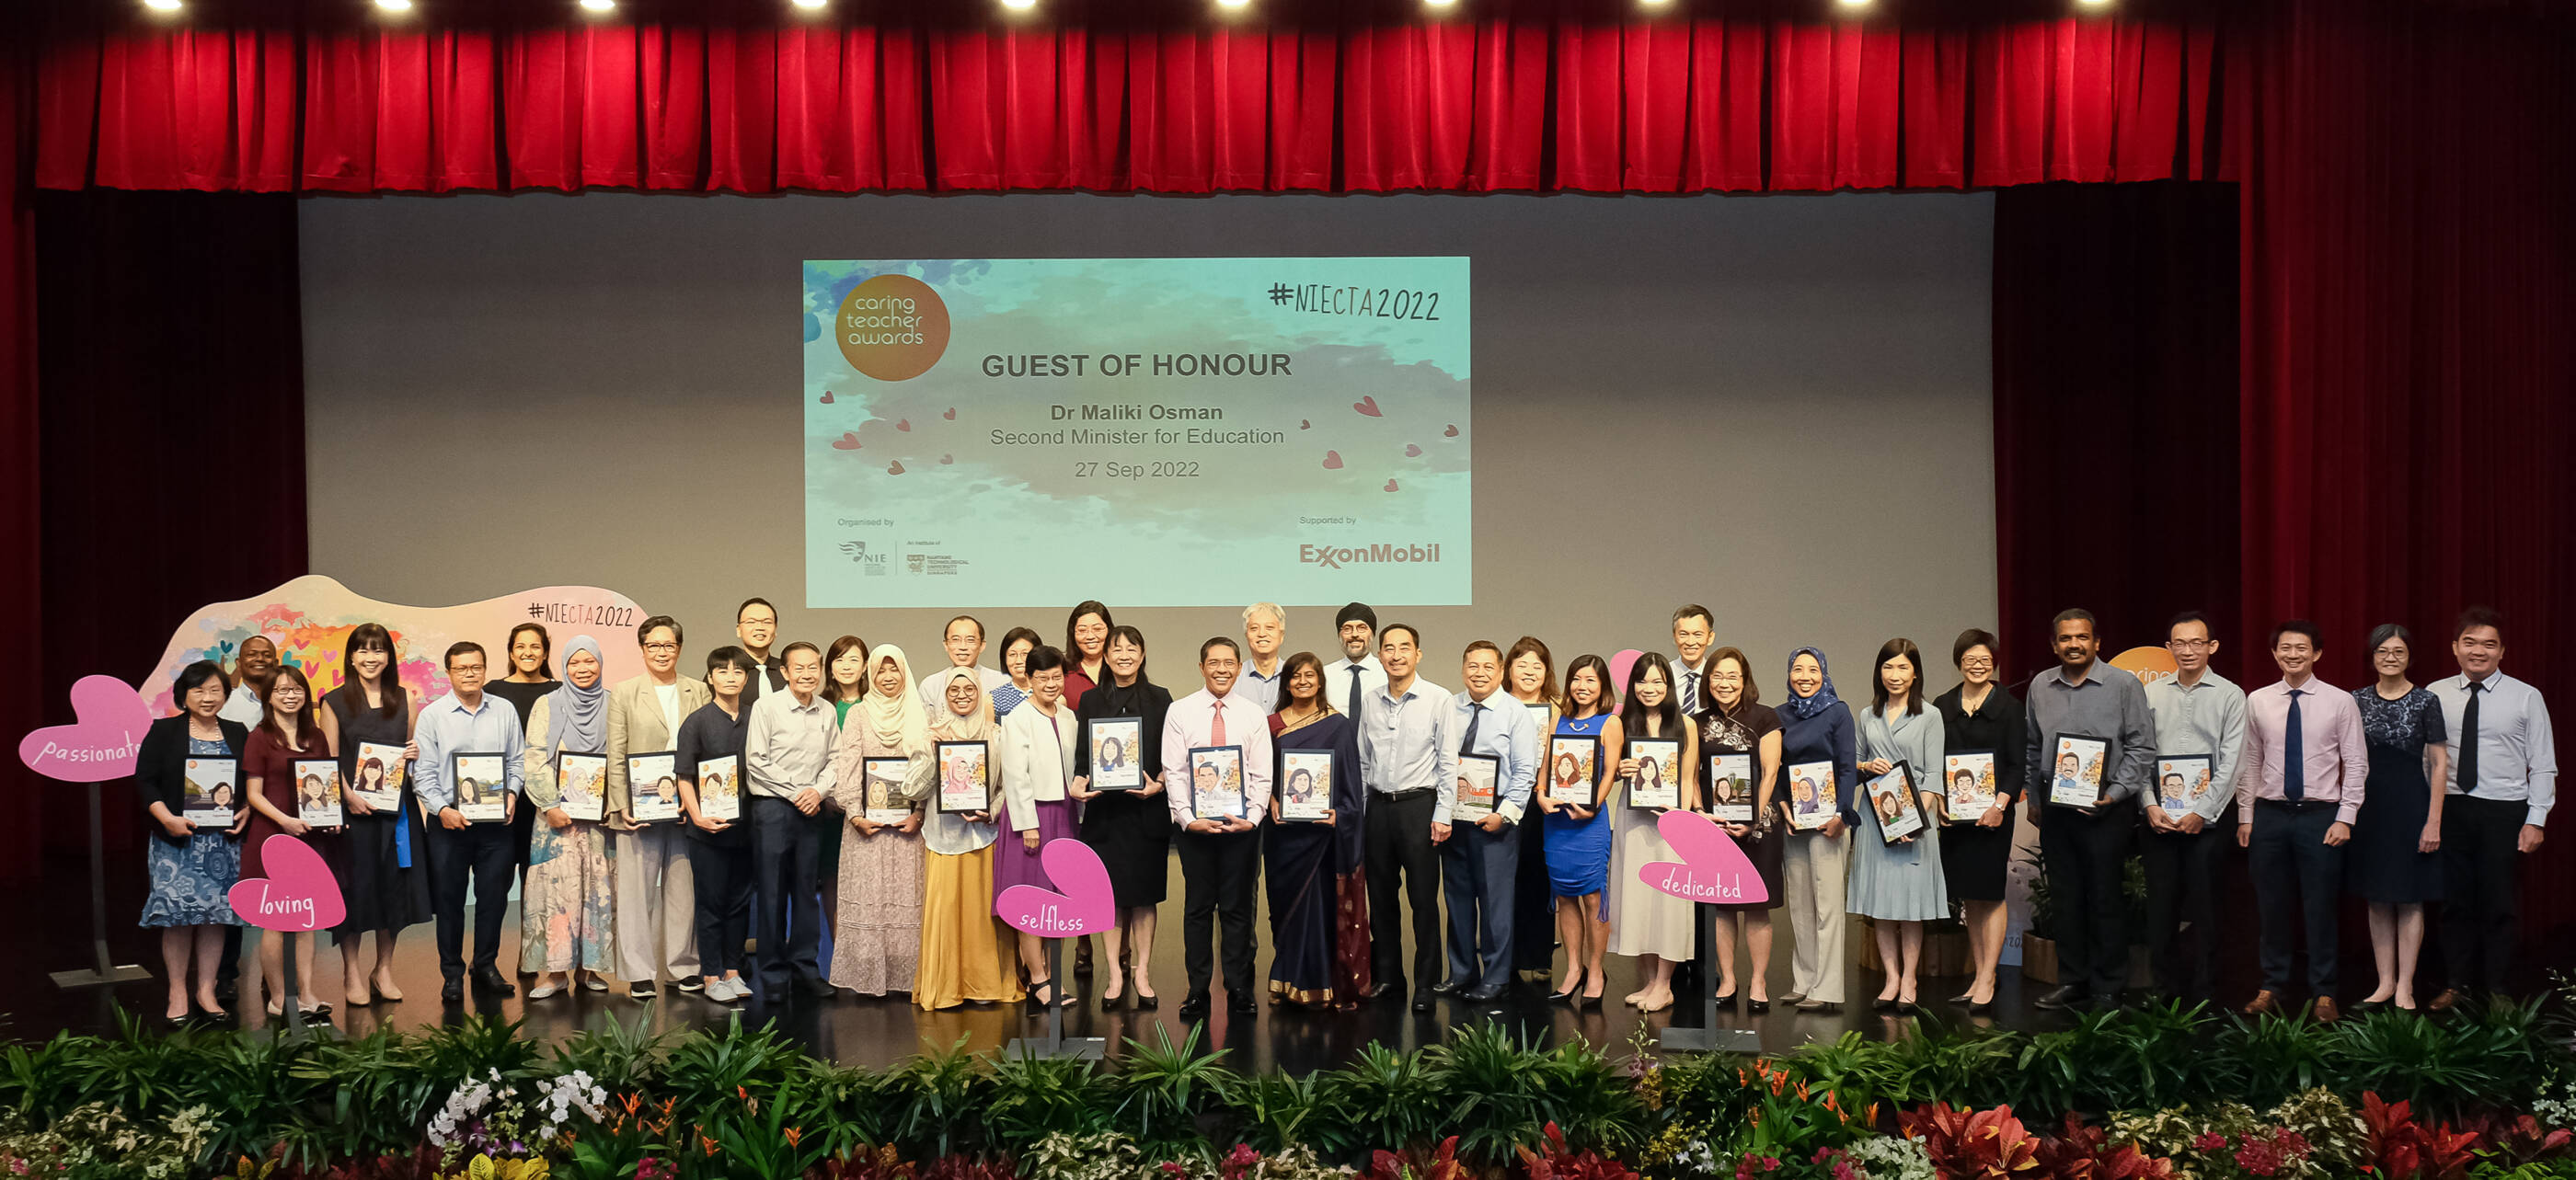 Image Photo credit: National Institute of Education, Singapore. Group photo taken during the biennial Caring Teacher Awards ceremony in 2022.